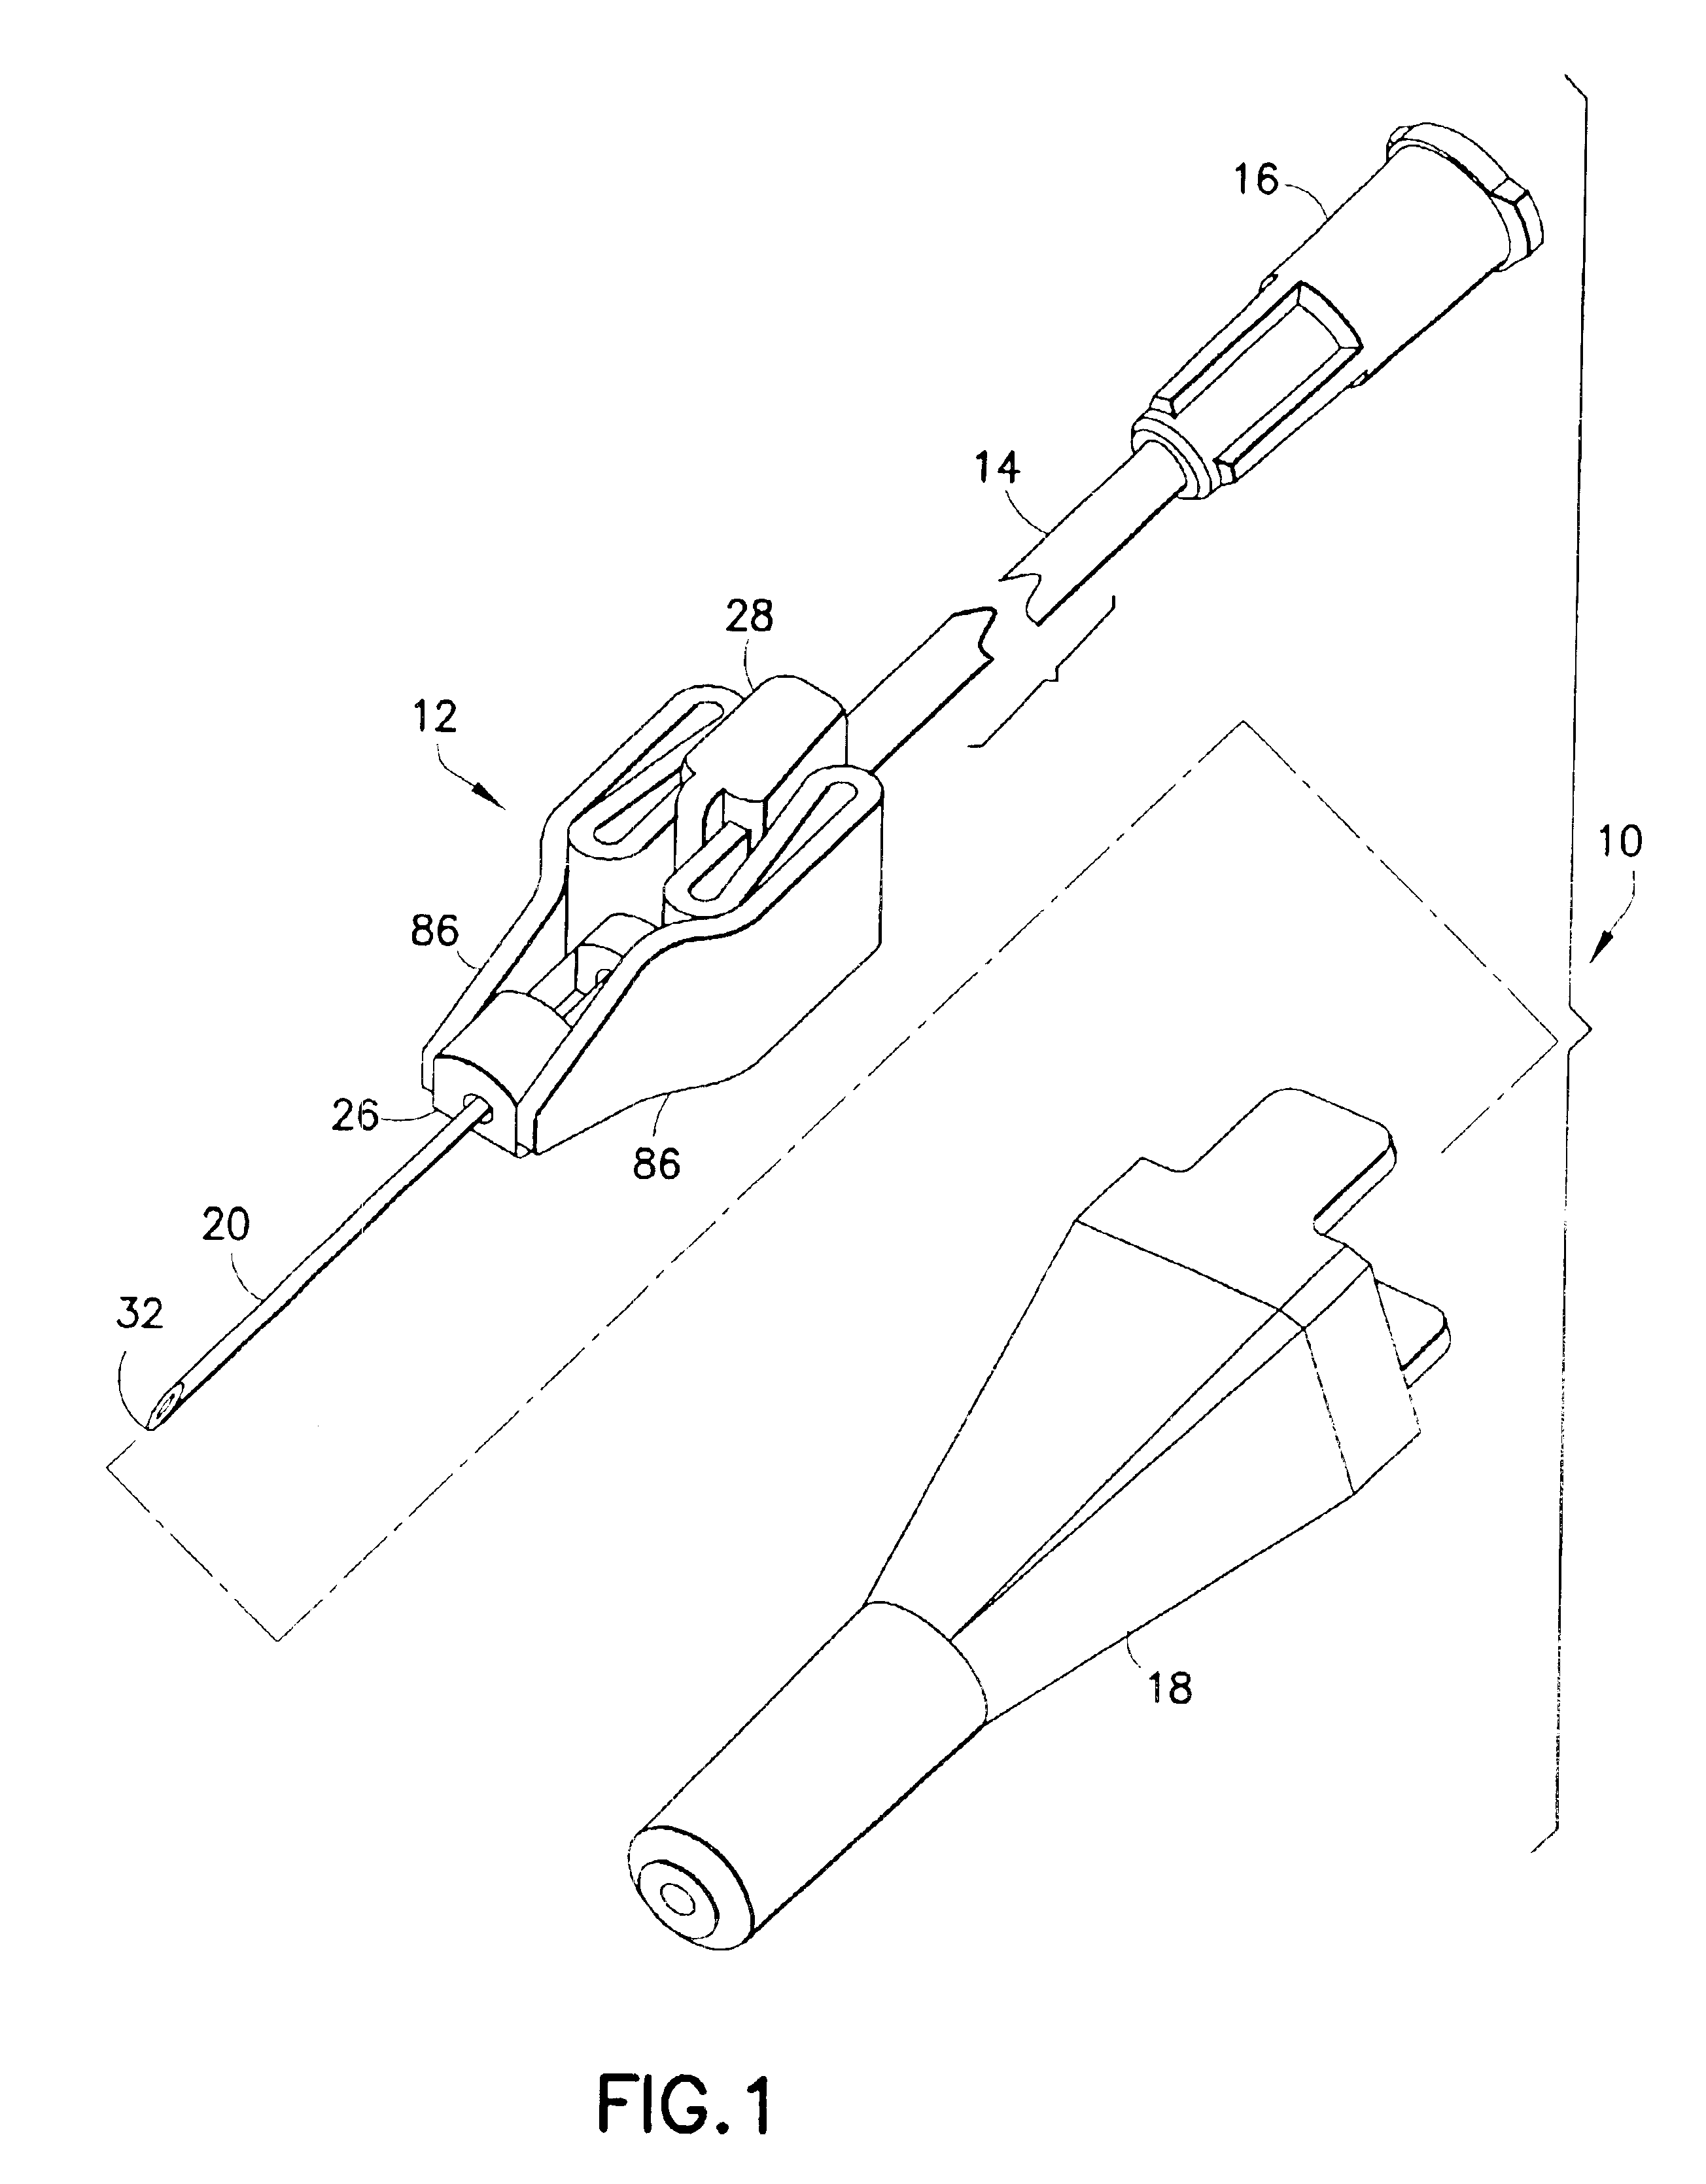 Passive safety device for needle of IV infusion or blood collection set